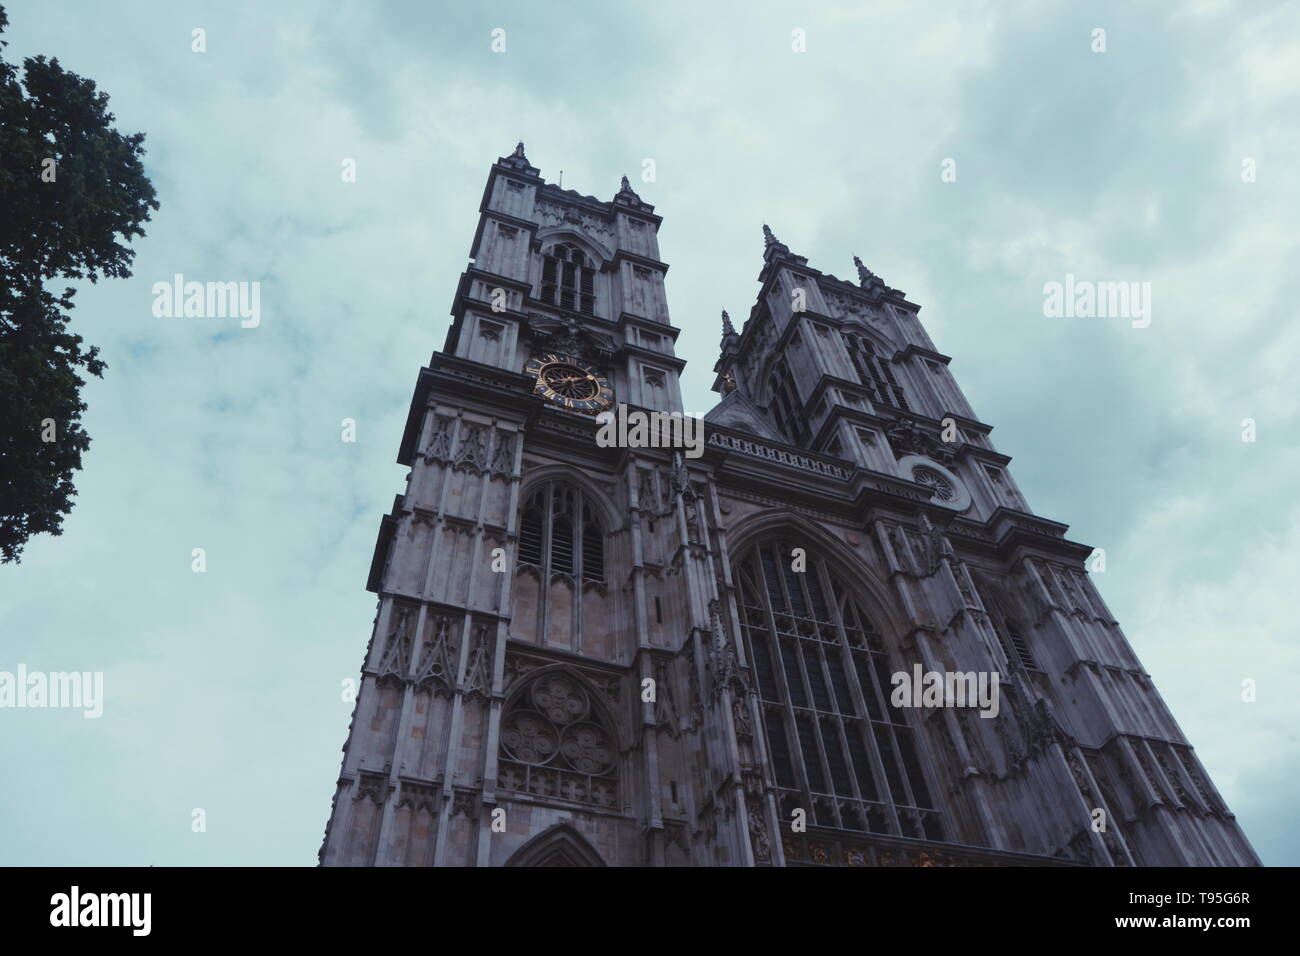 The famous Westminster Abbey, London, UK shot in a low-angle perspective on a cloudy day. On the left-hand side a tree comes into the frame. Stock Photo